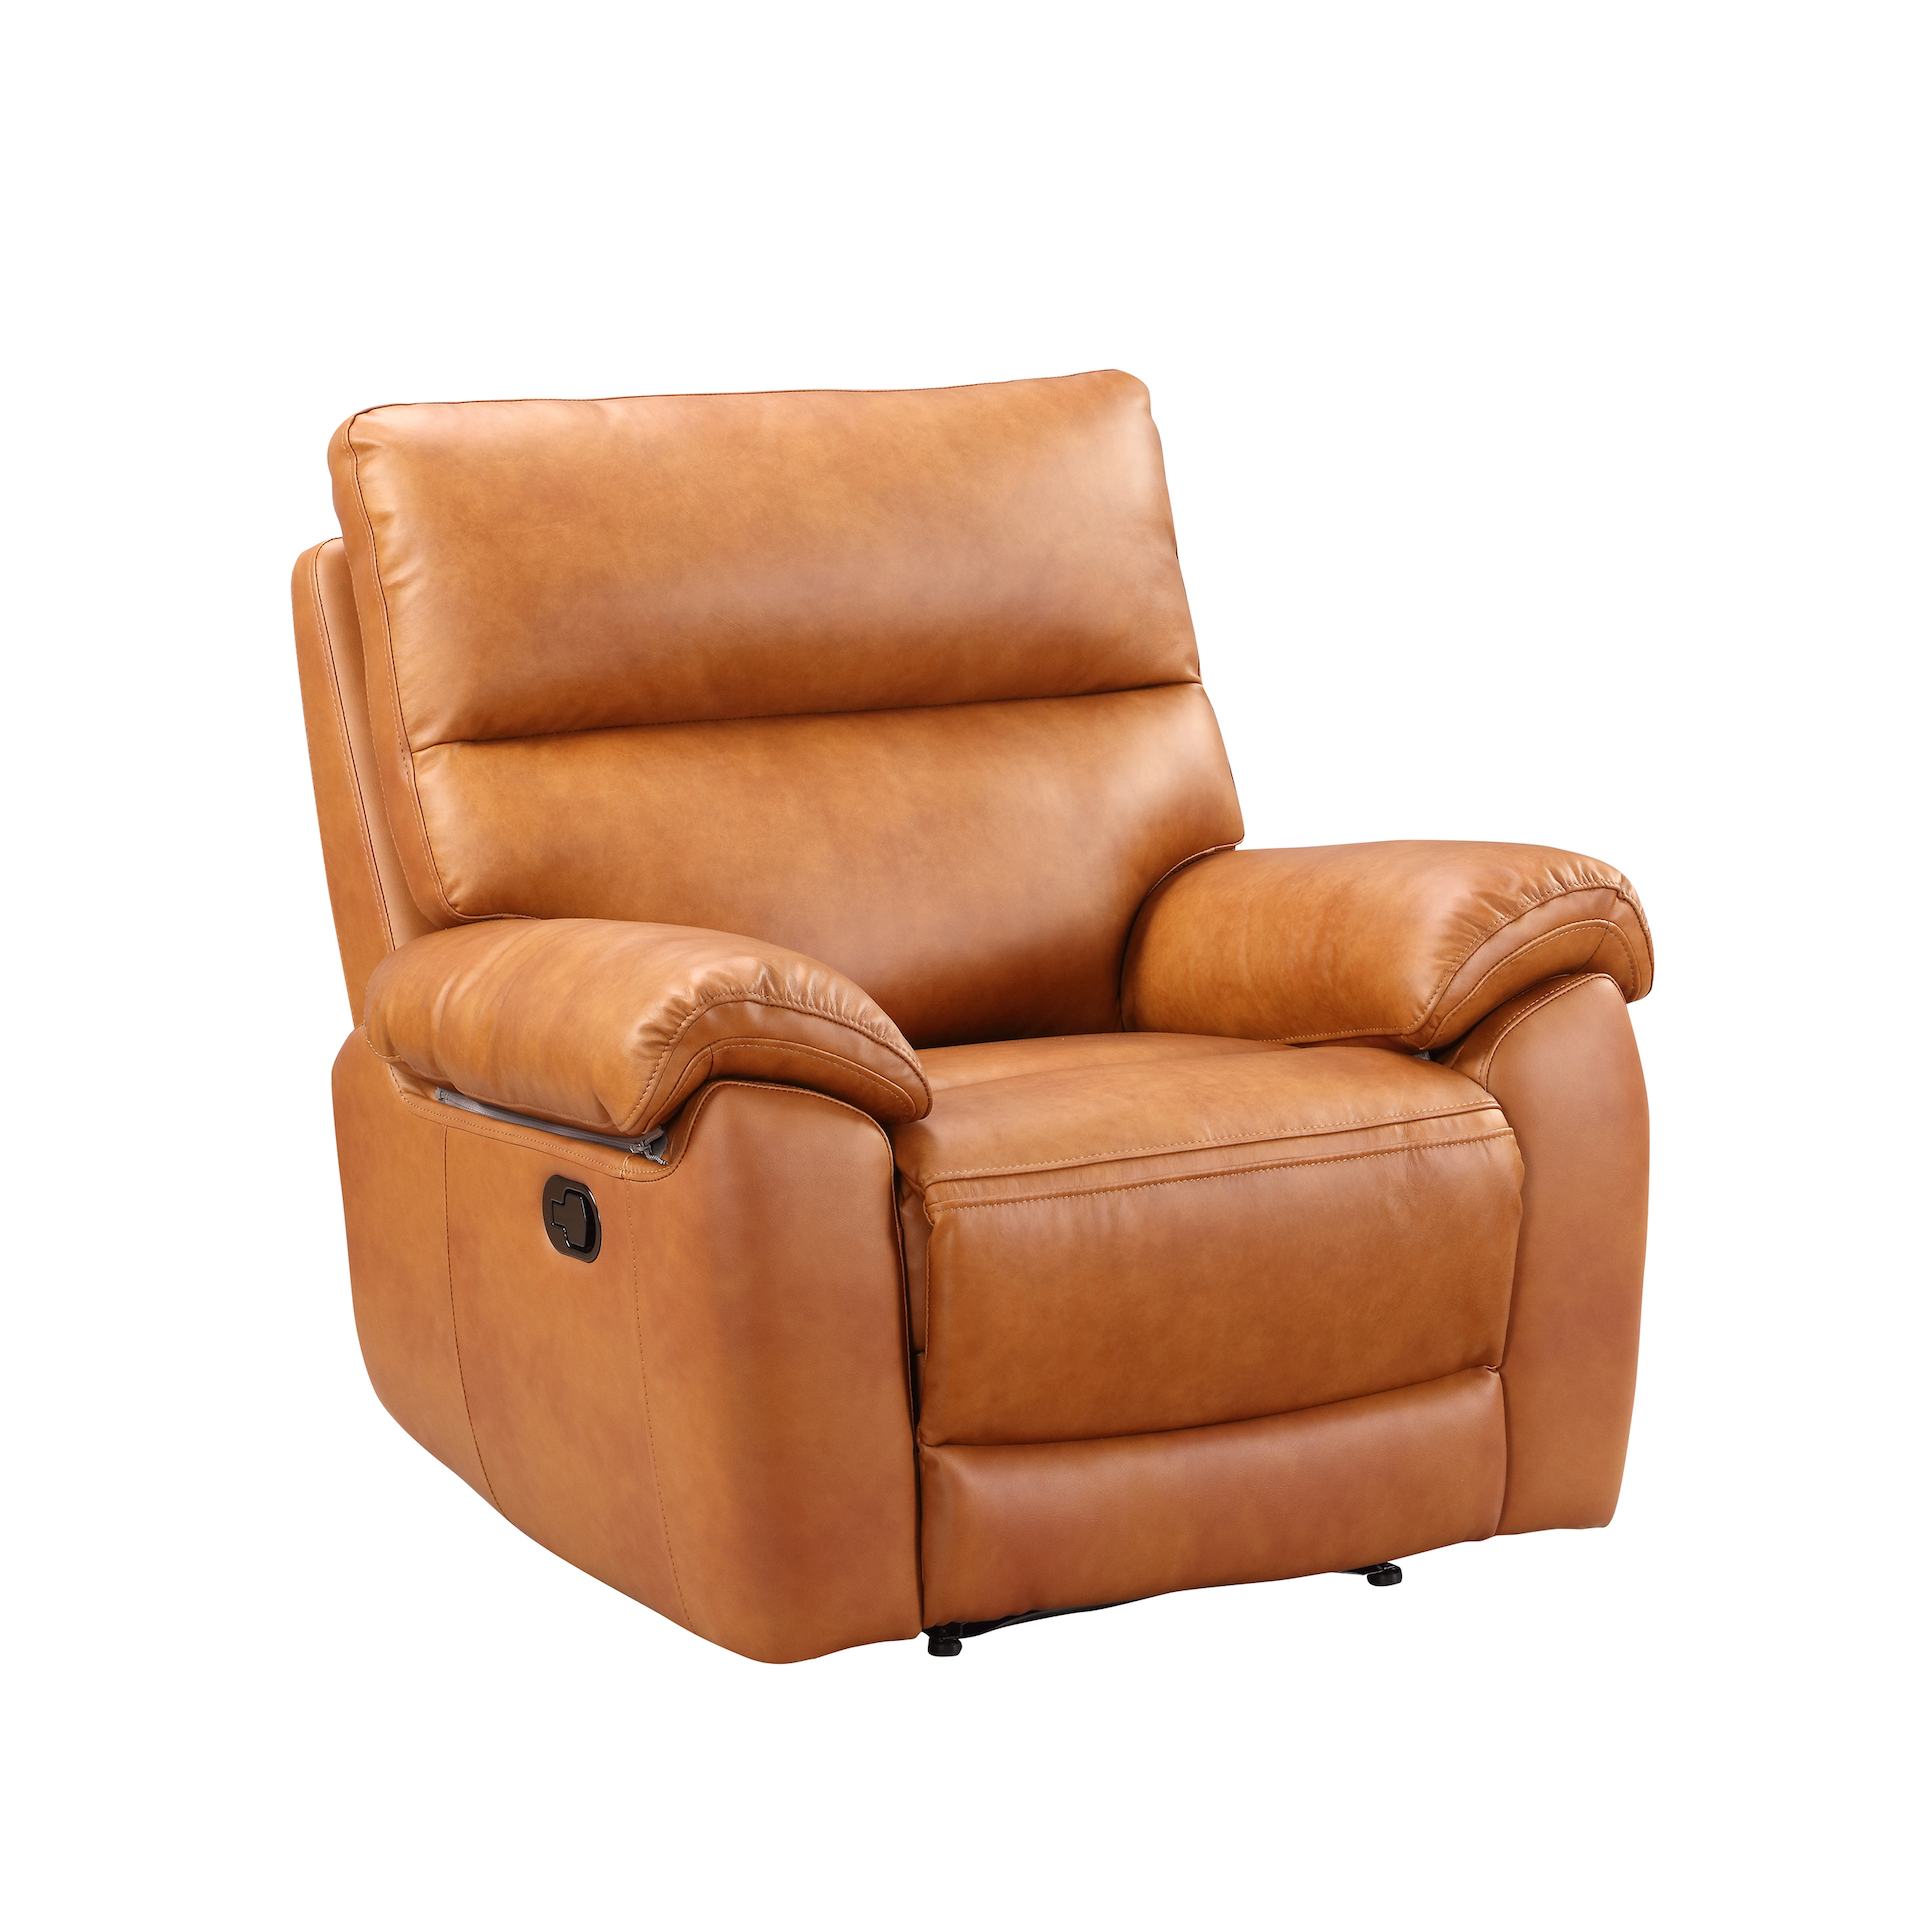 Rocco Manual Recliner Chair Tan Leather